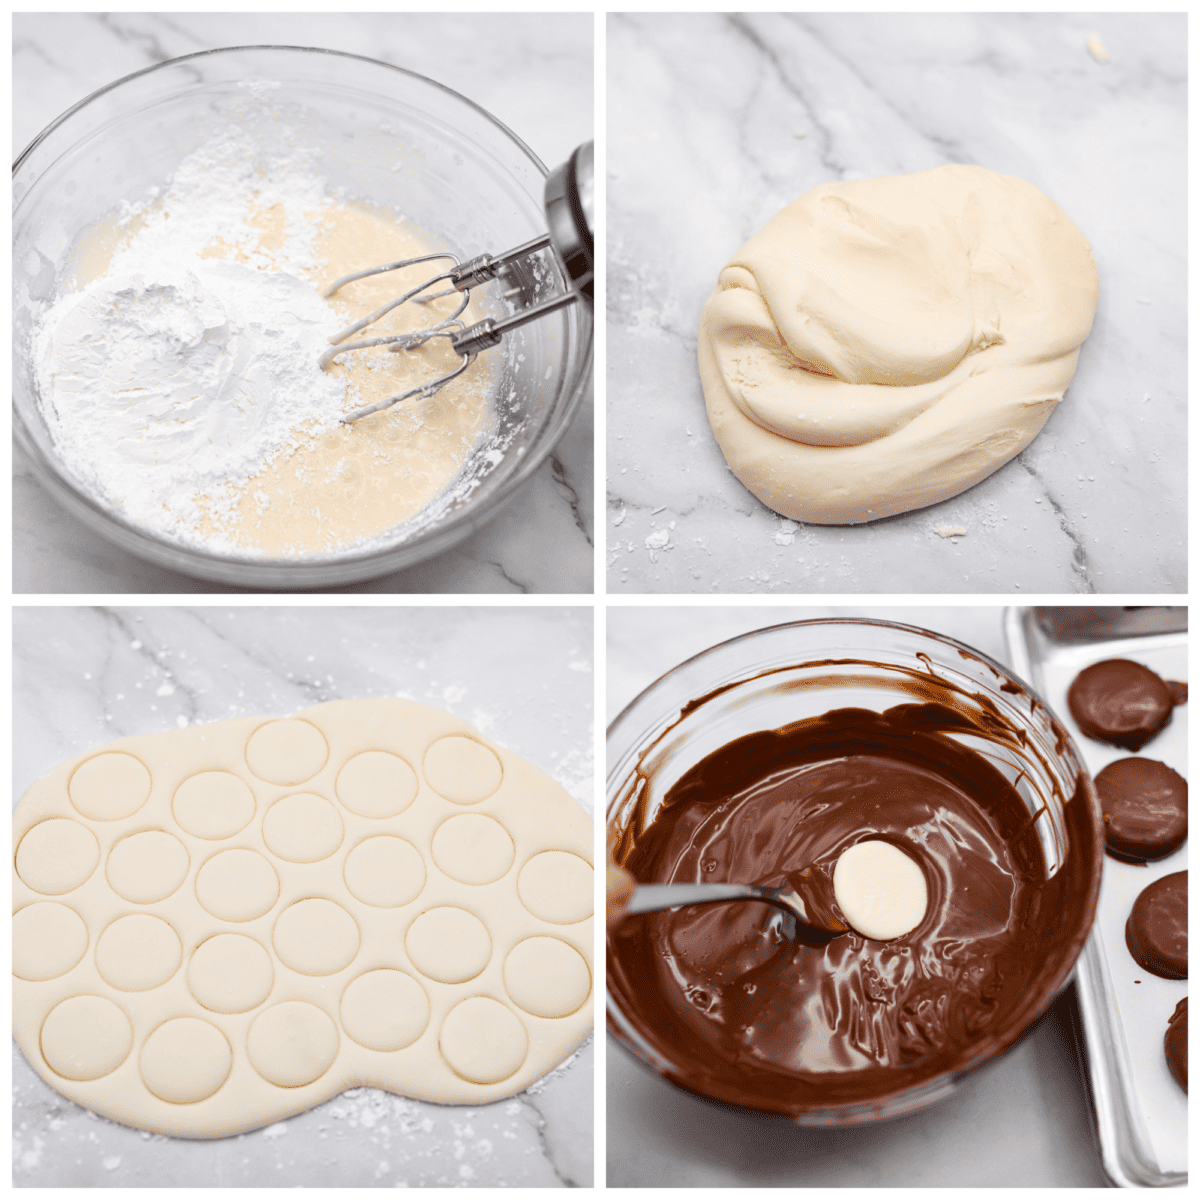 4-photo collage of the dough and chocolate coating being prepared.